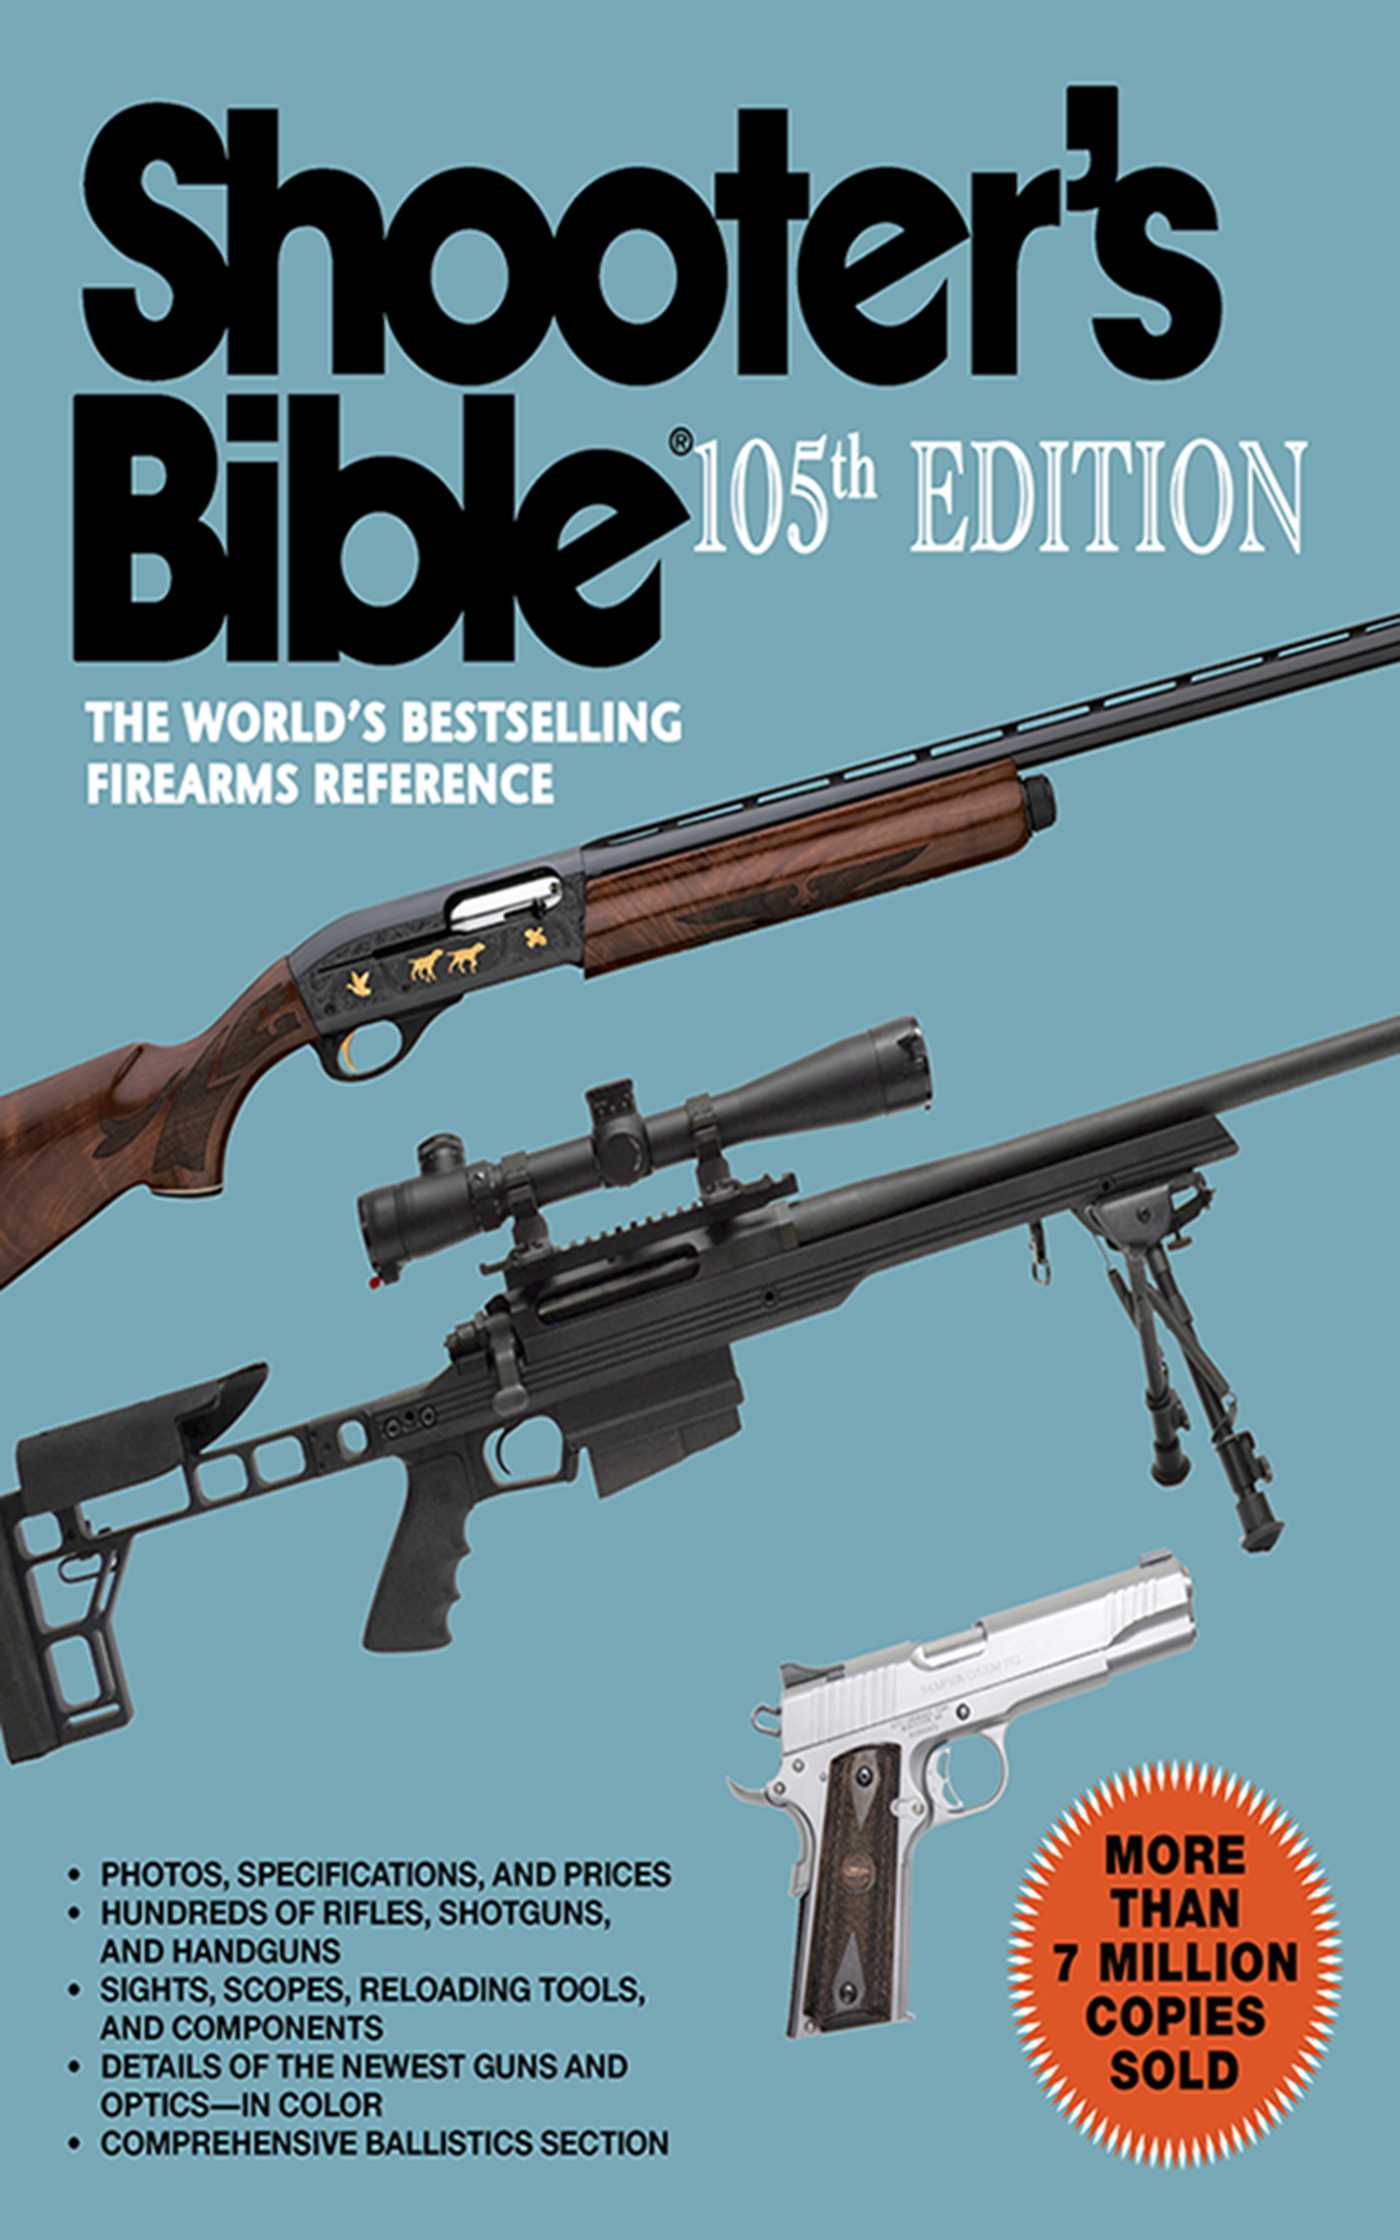 Shooter's Bible, 105th Edition : The World's Bestselling Firearms Reference (Paperback) - image 2 of 2